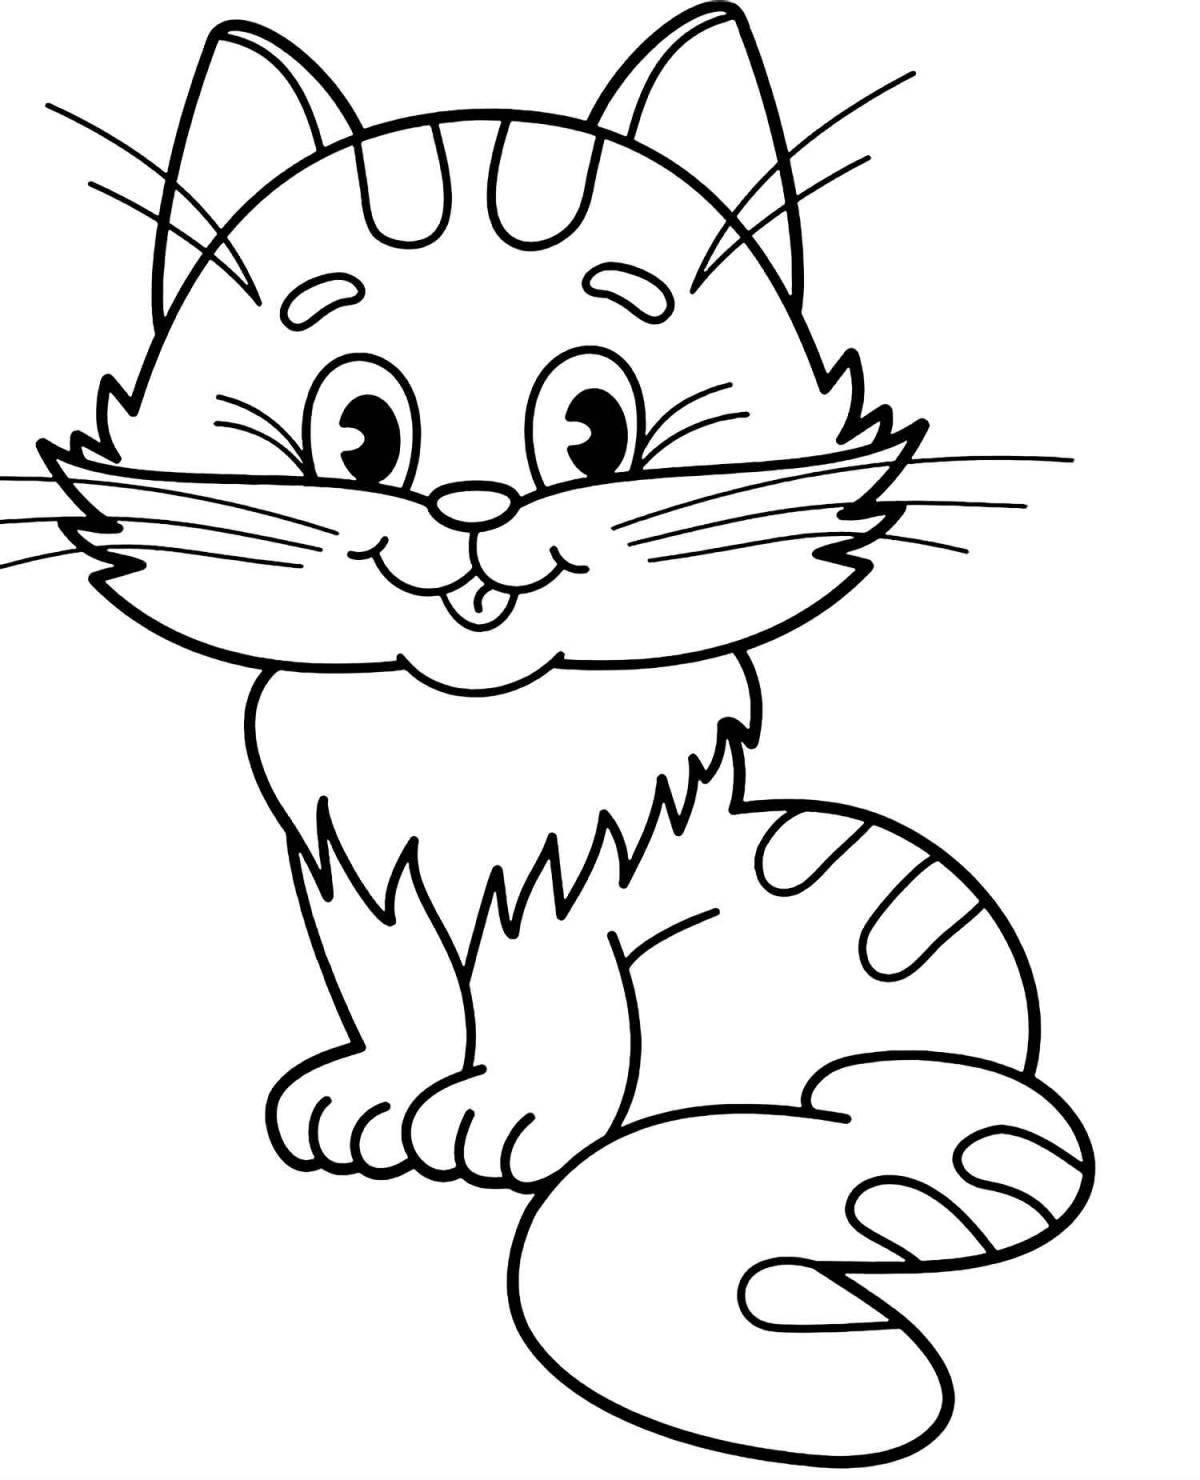 Adorable wooden cat coloring page